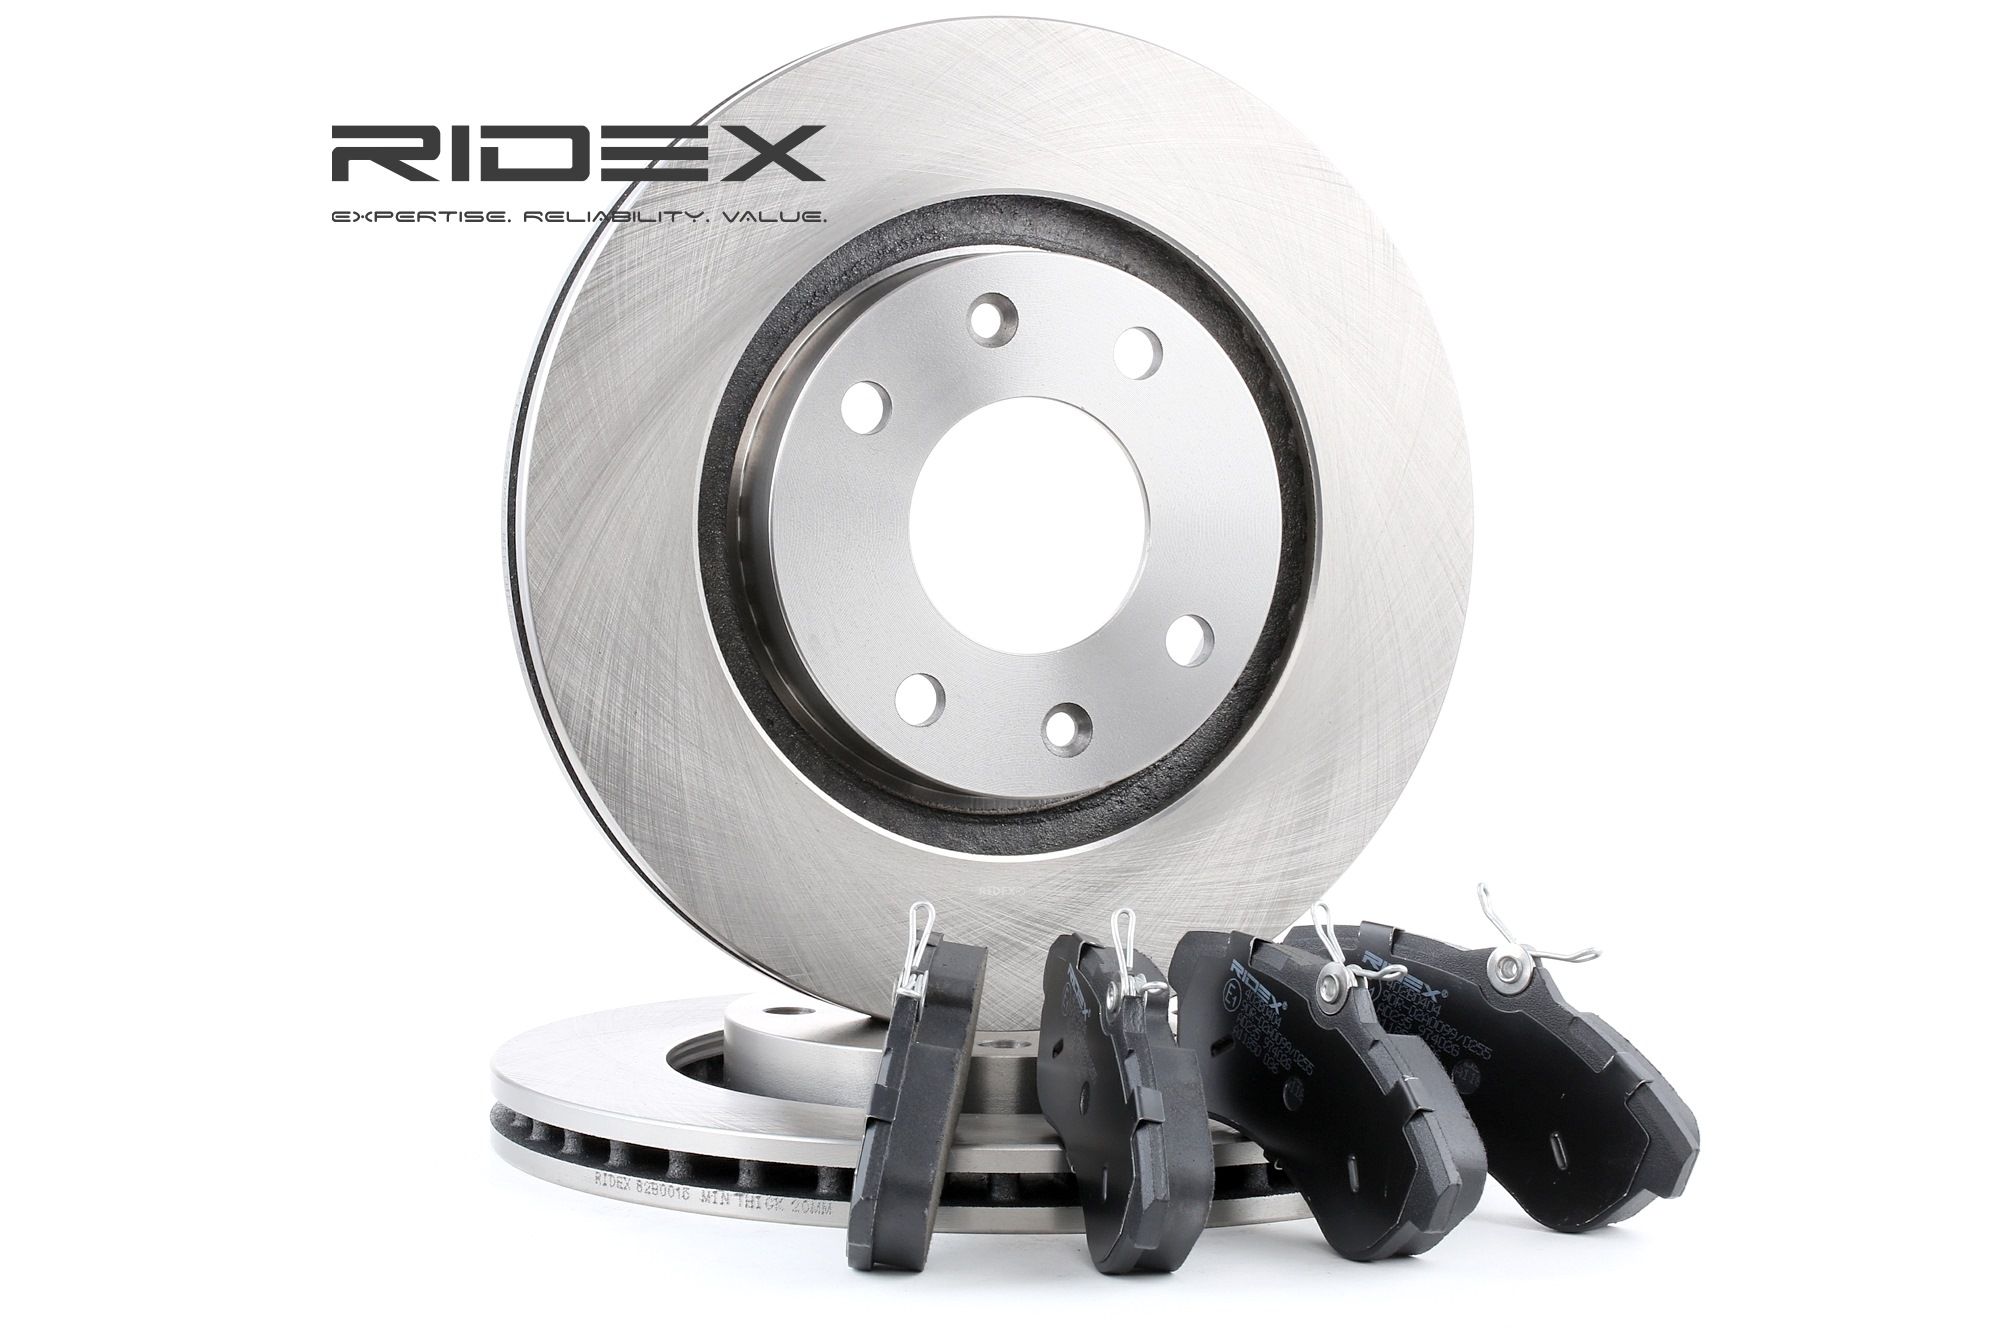 RIDEX 3405B0191 Brake discs and pads set Front Axle, Vented, not prepared for wear indicator